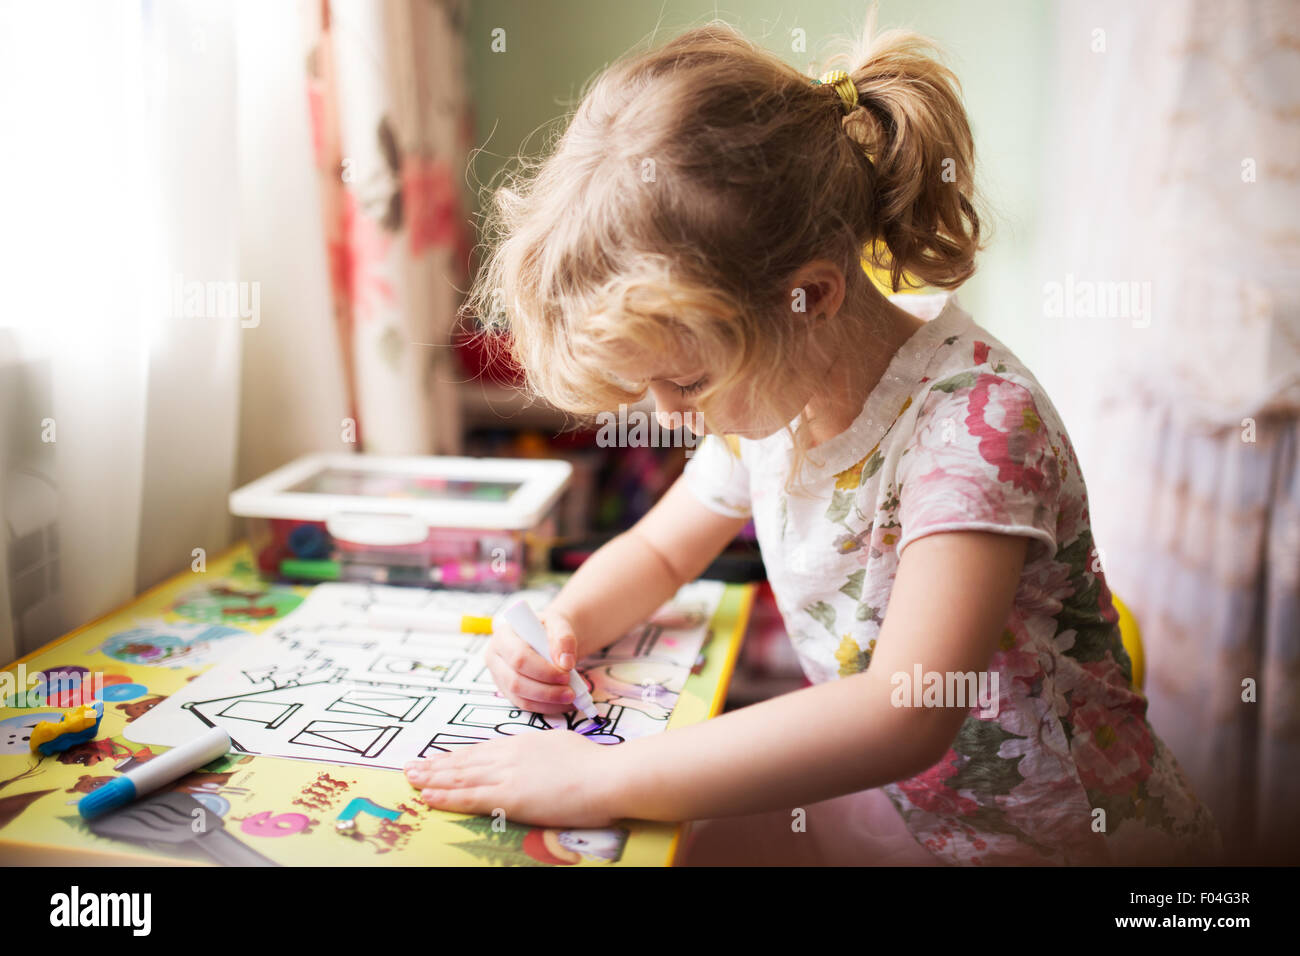 Little girl painting in her room at home, shallow dof Stock Photo